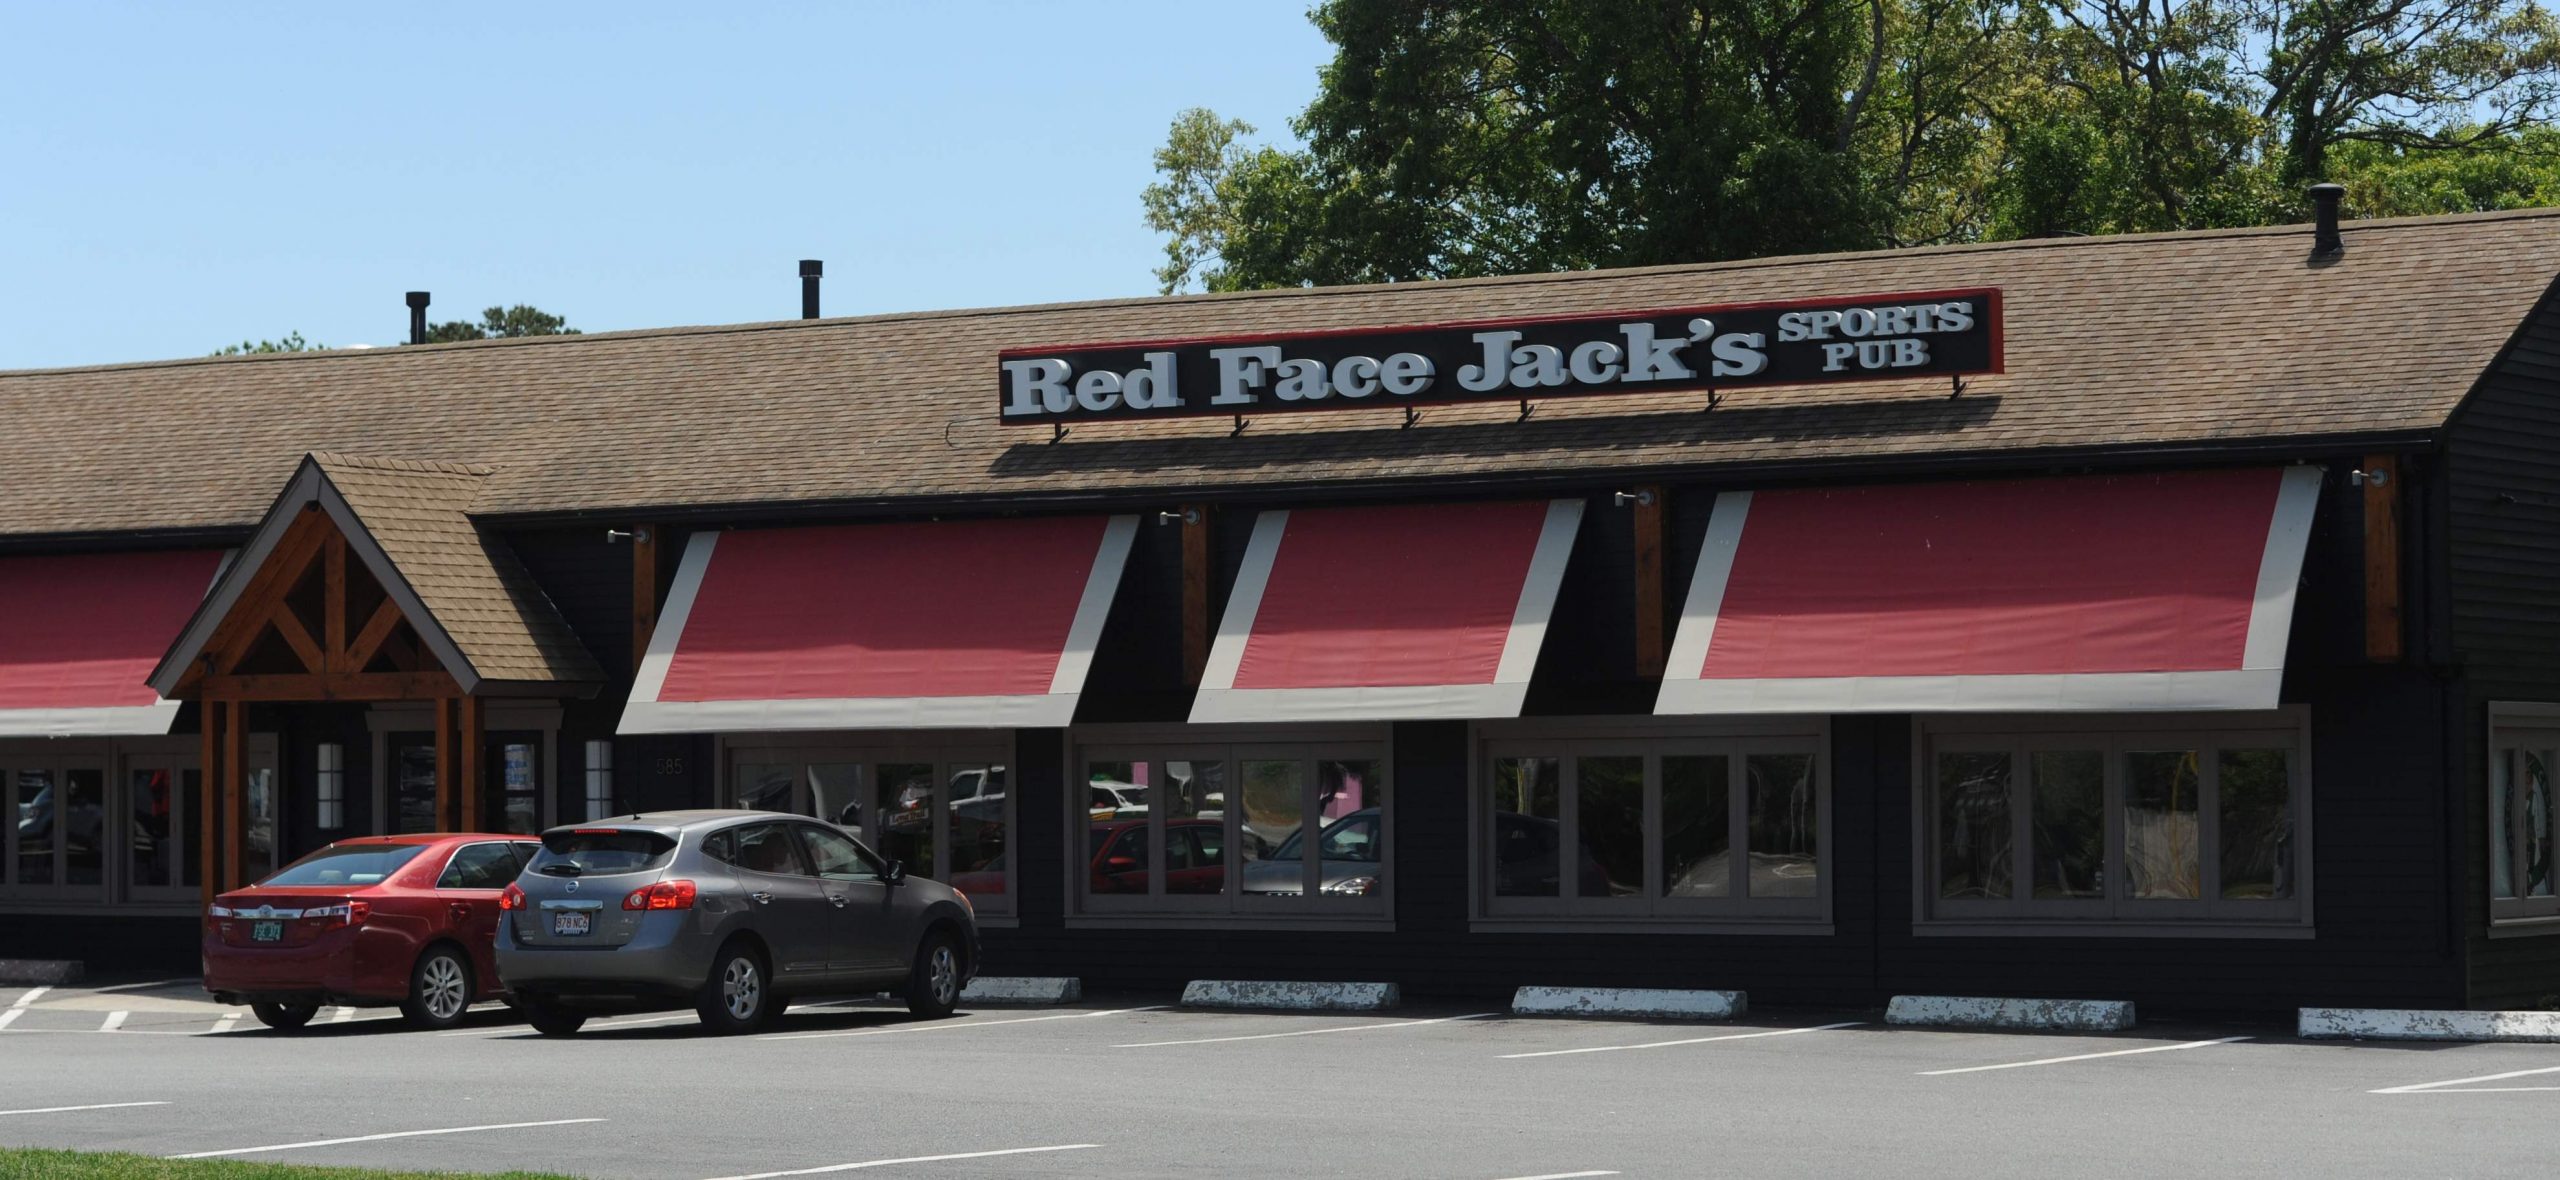 Red Face Jack’s in West Yarmouth, MA